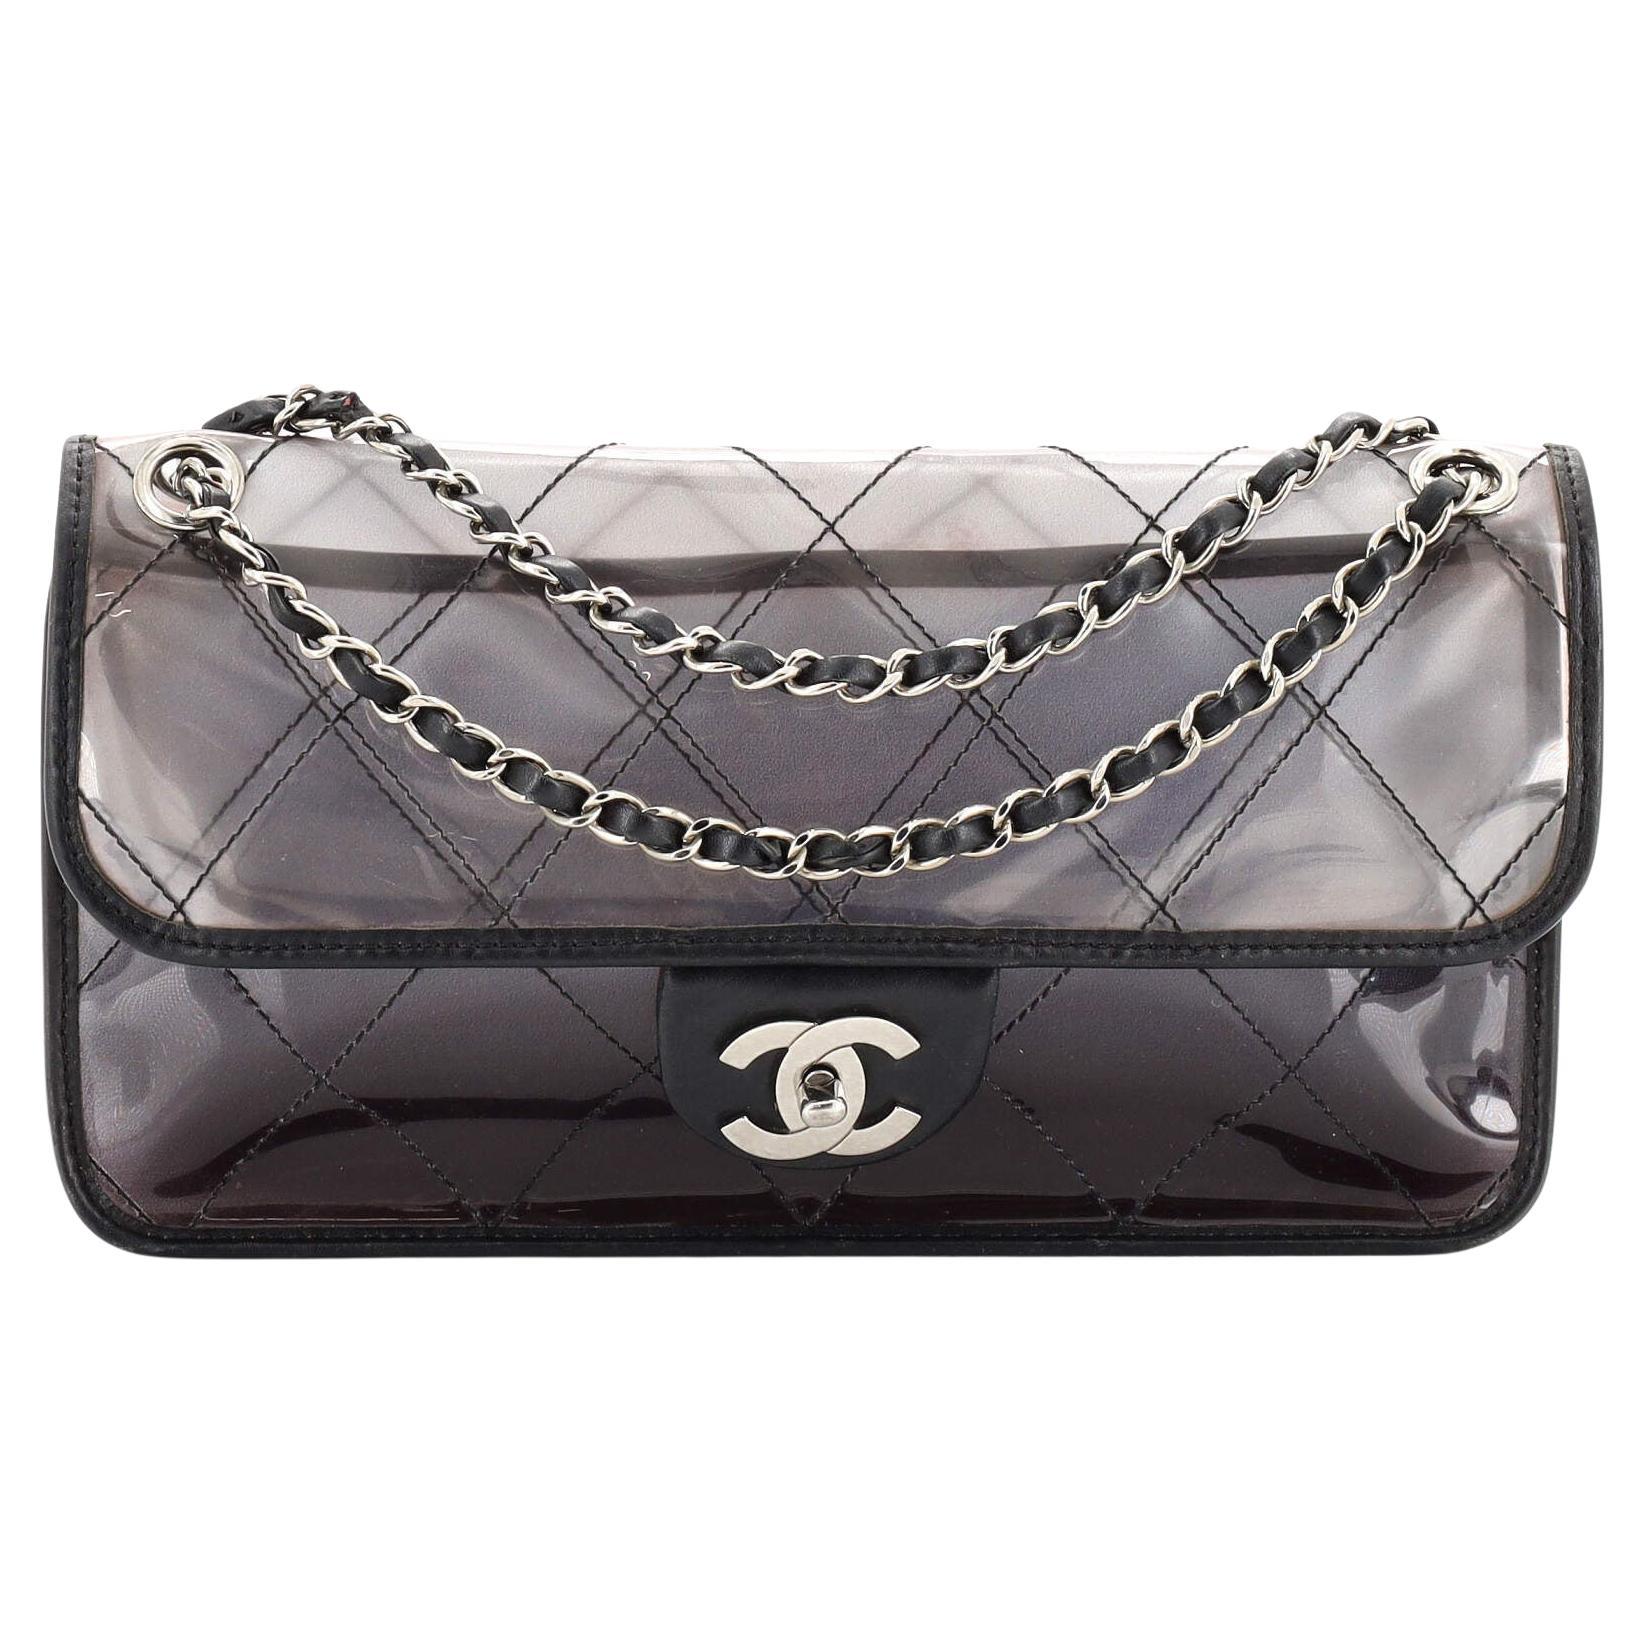 Chanel Handbags for Sale at Auction - Page 17